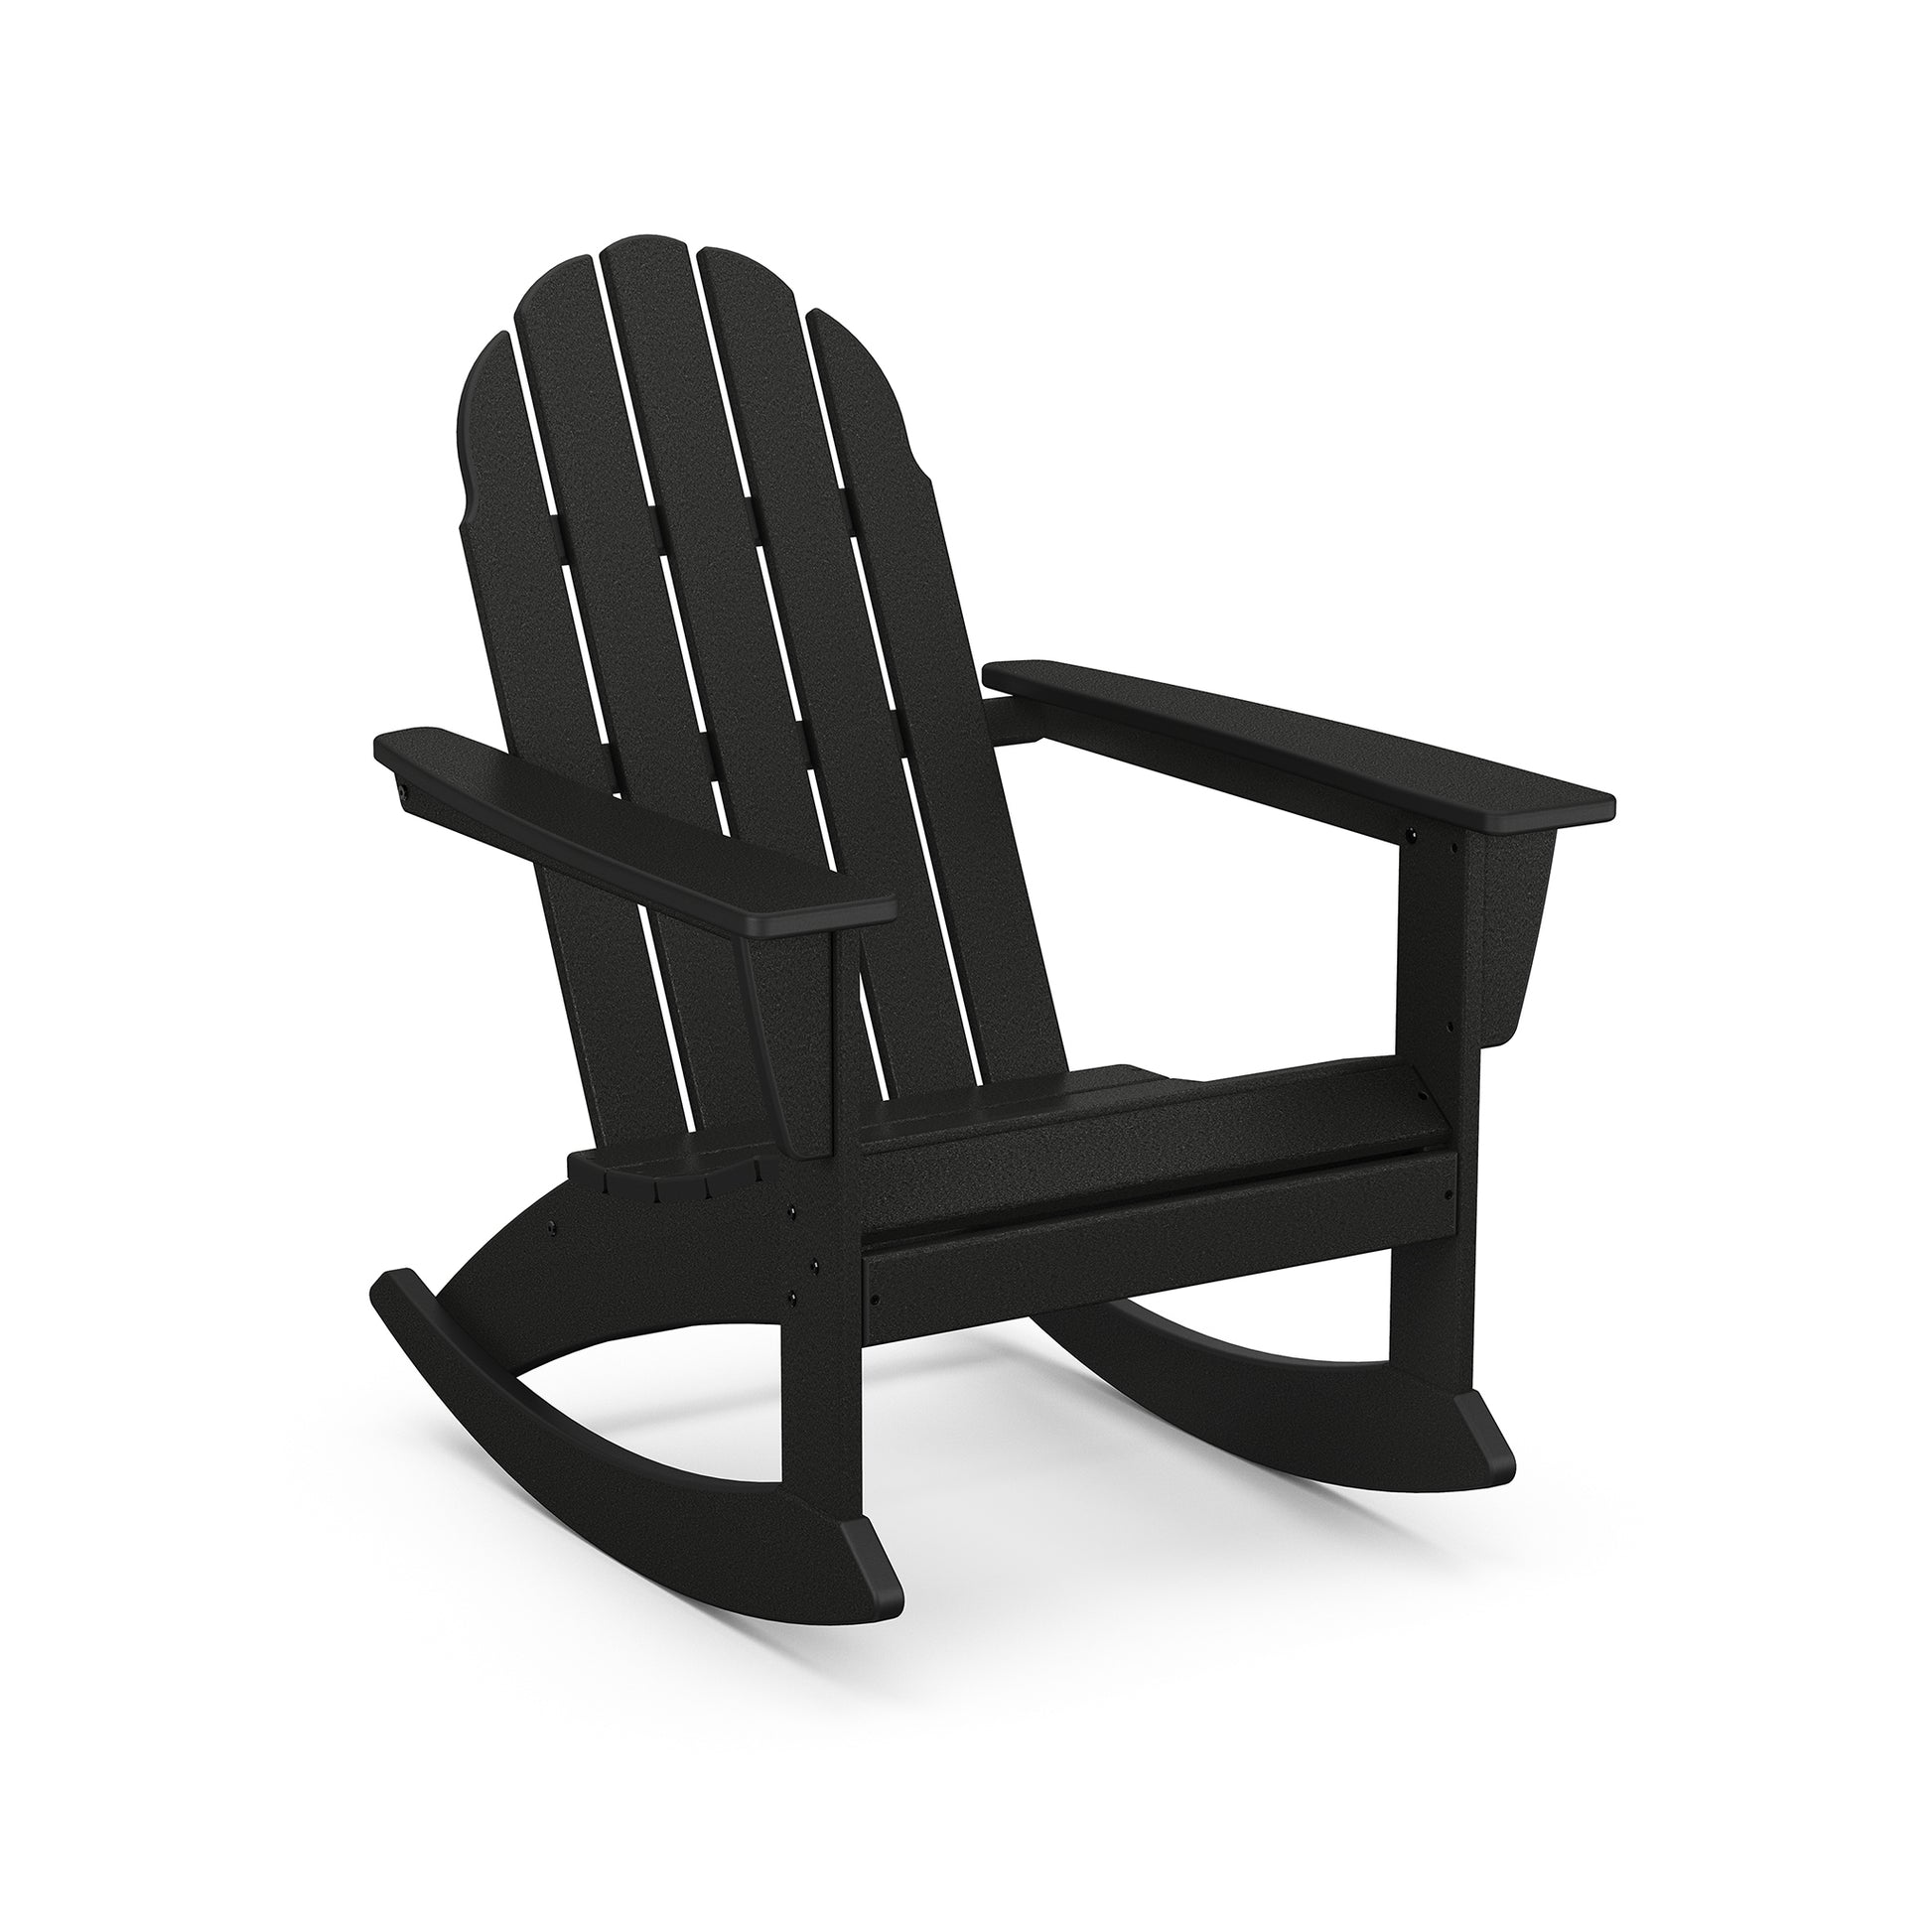 A black POLYWOOD® Vineyard Adirondack Rocking Chair with a classic slatted design and wide armrests, shown on a plain white background.